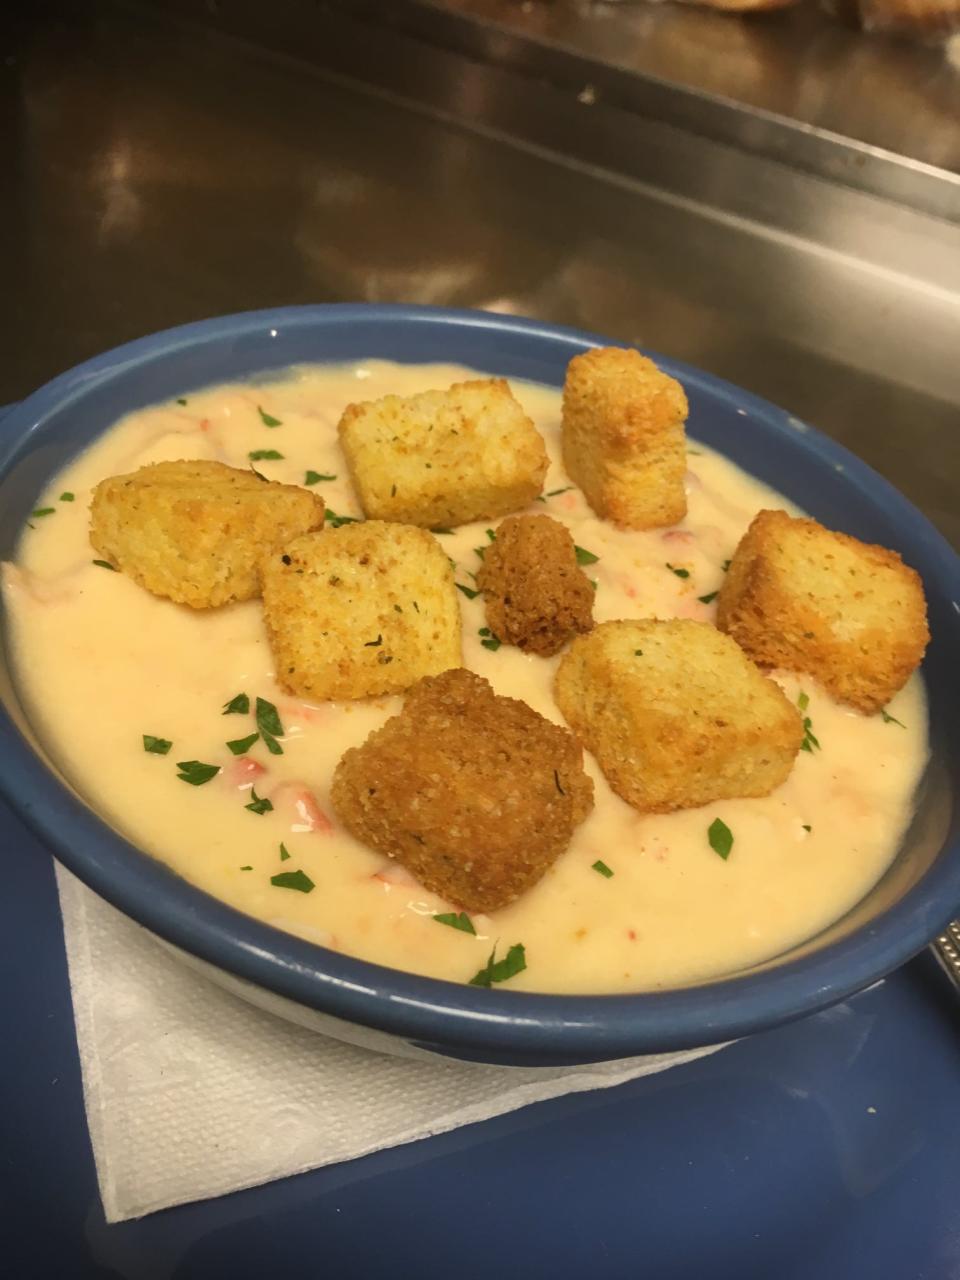 The Cabin in Middleboro has creamy seafood bisque, with shrimp and scallops in a lobster base, garnished with herbed croutons.